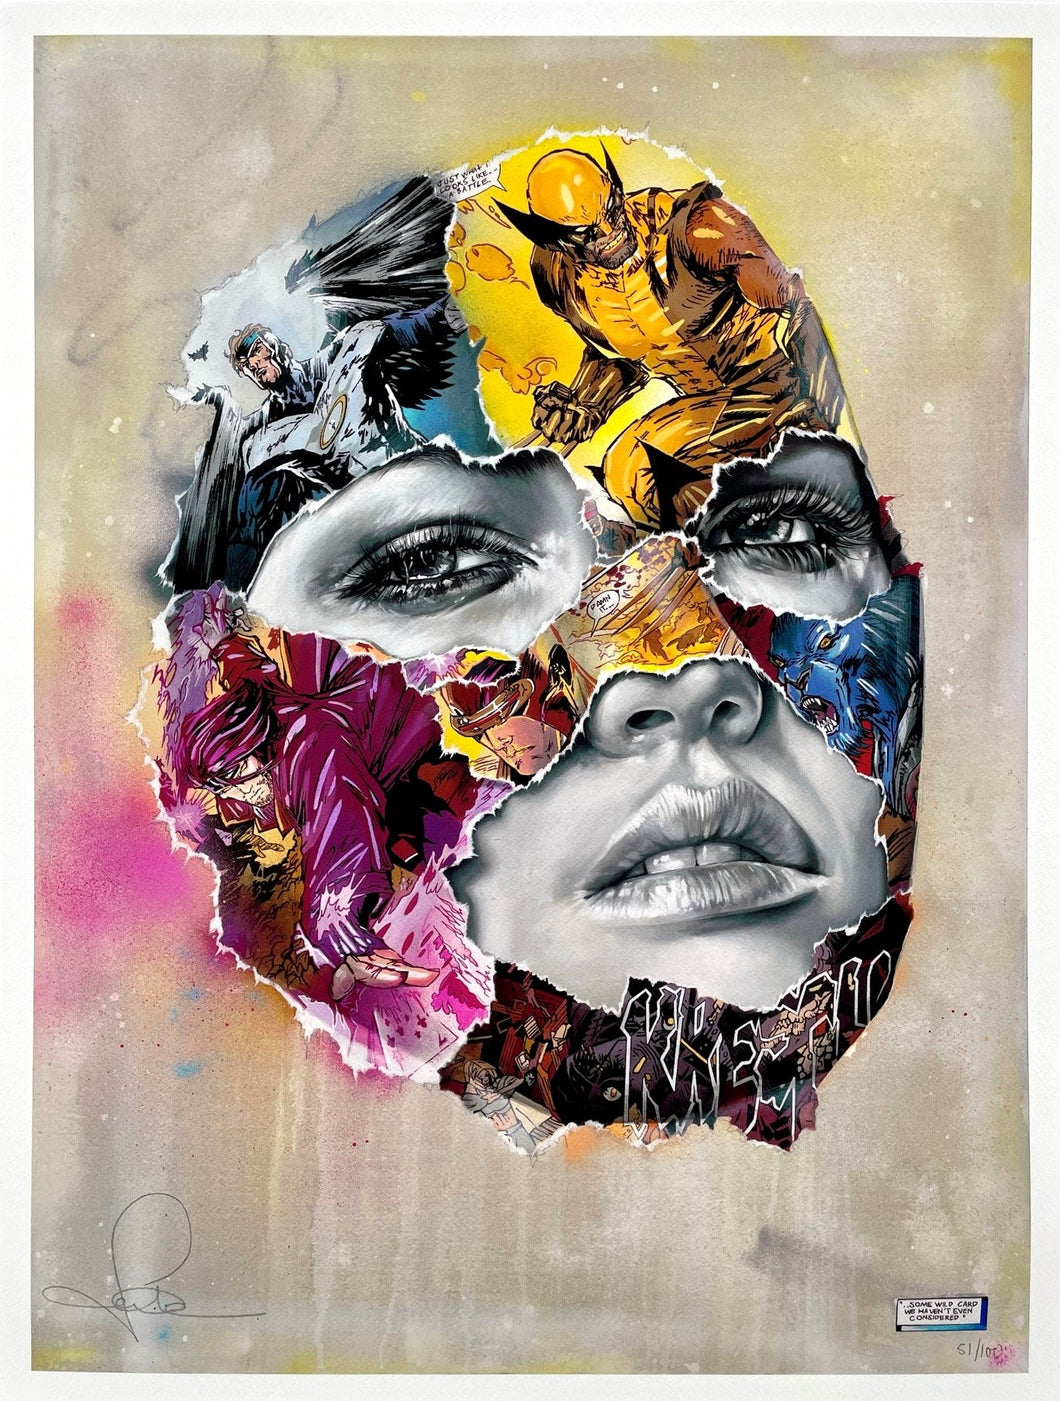 The Ravaging Bliss Cage Print Sandra Chevrier